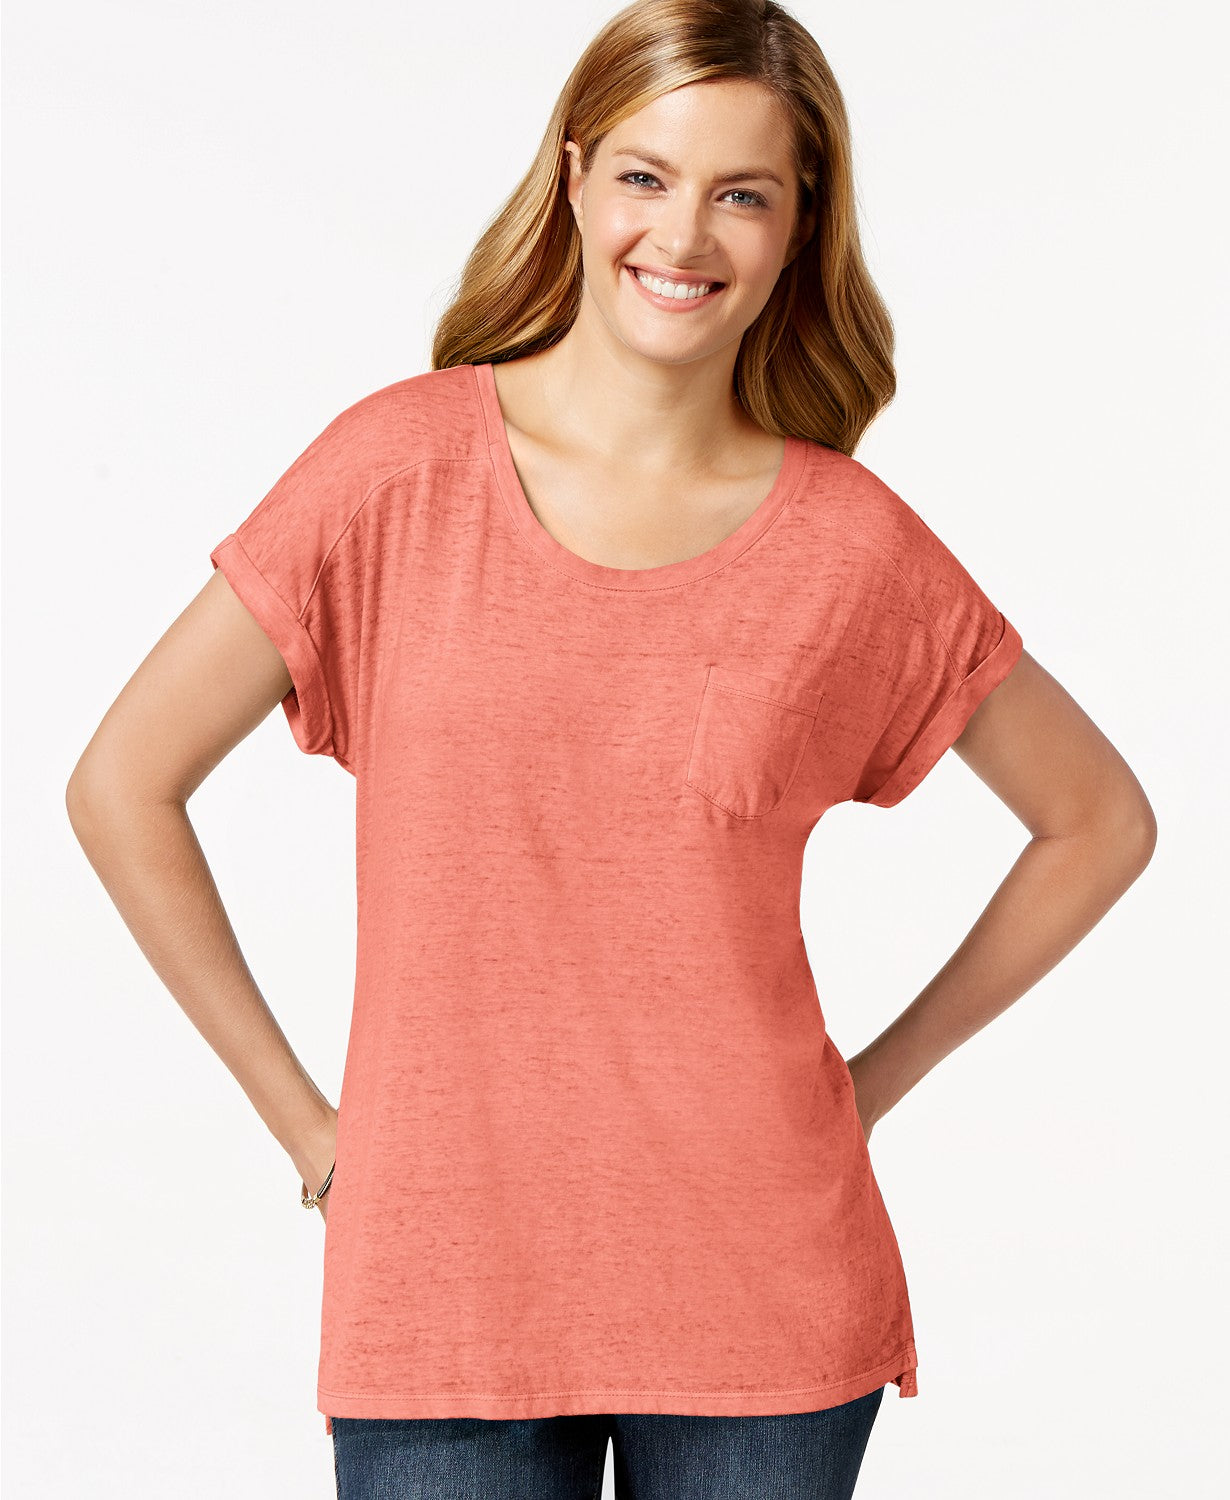 Style Co Petite One-Pocket Burnout Tee Peach Zing PL